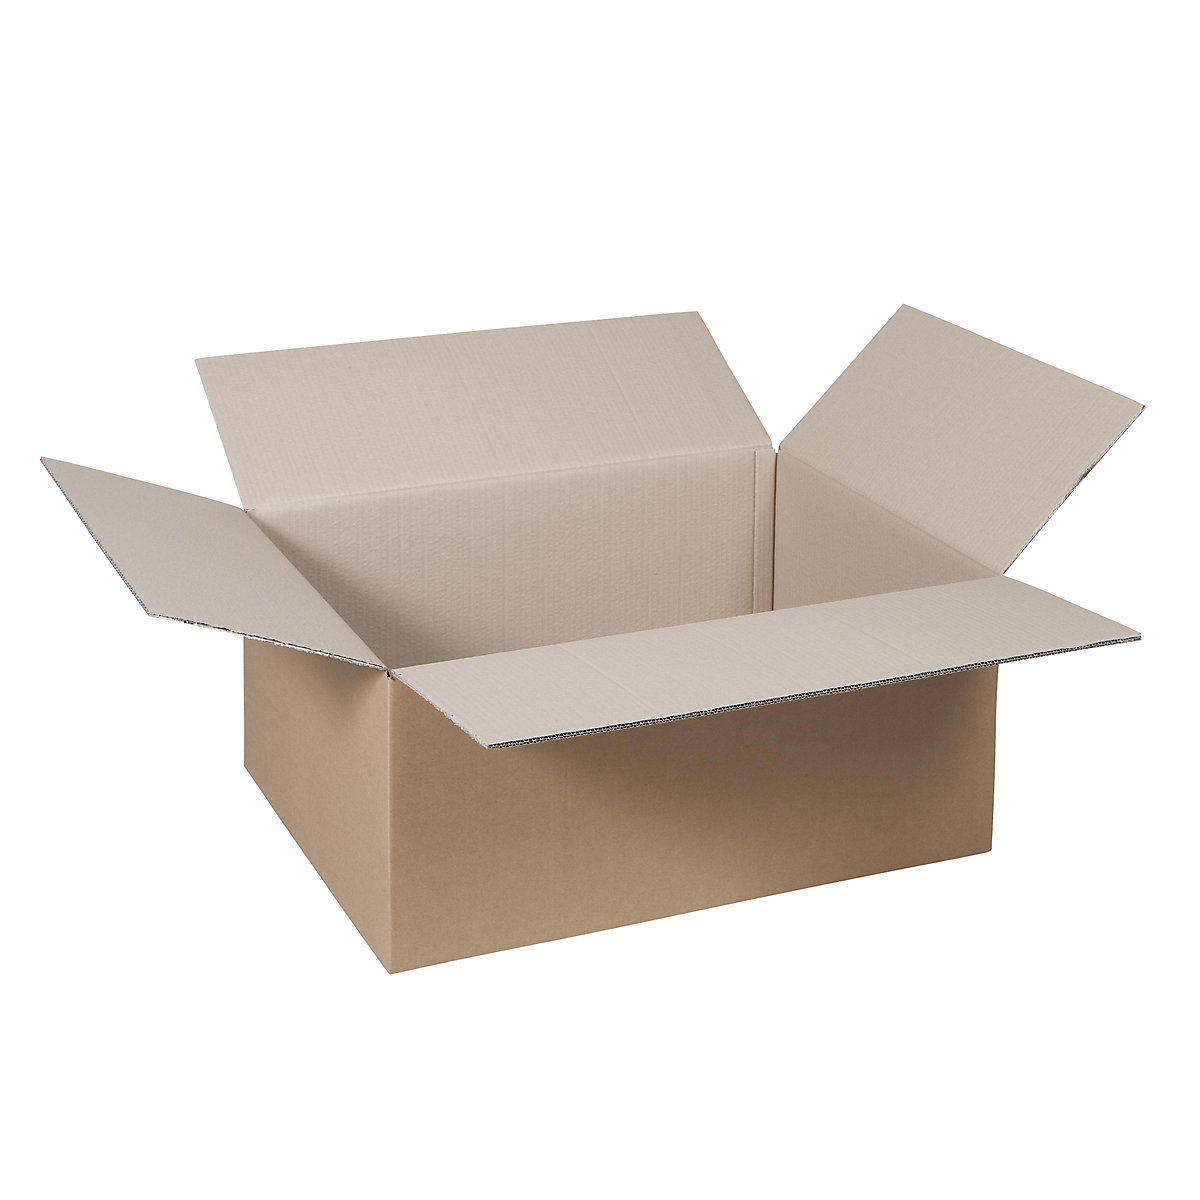 Folding cardboard box, FEFCO 0201, made of double fluted cardboard, internal dimensions 700 x 500 x 300 mm, pack of 100-12